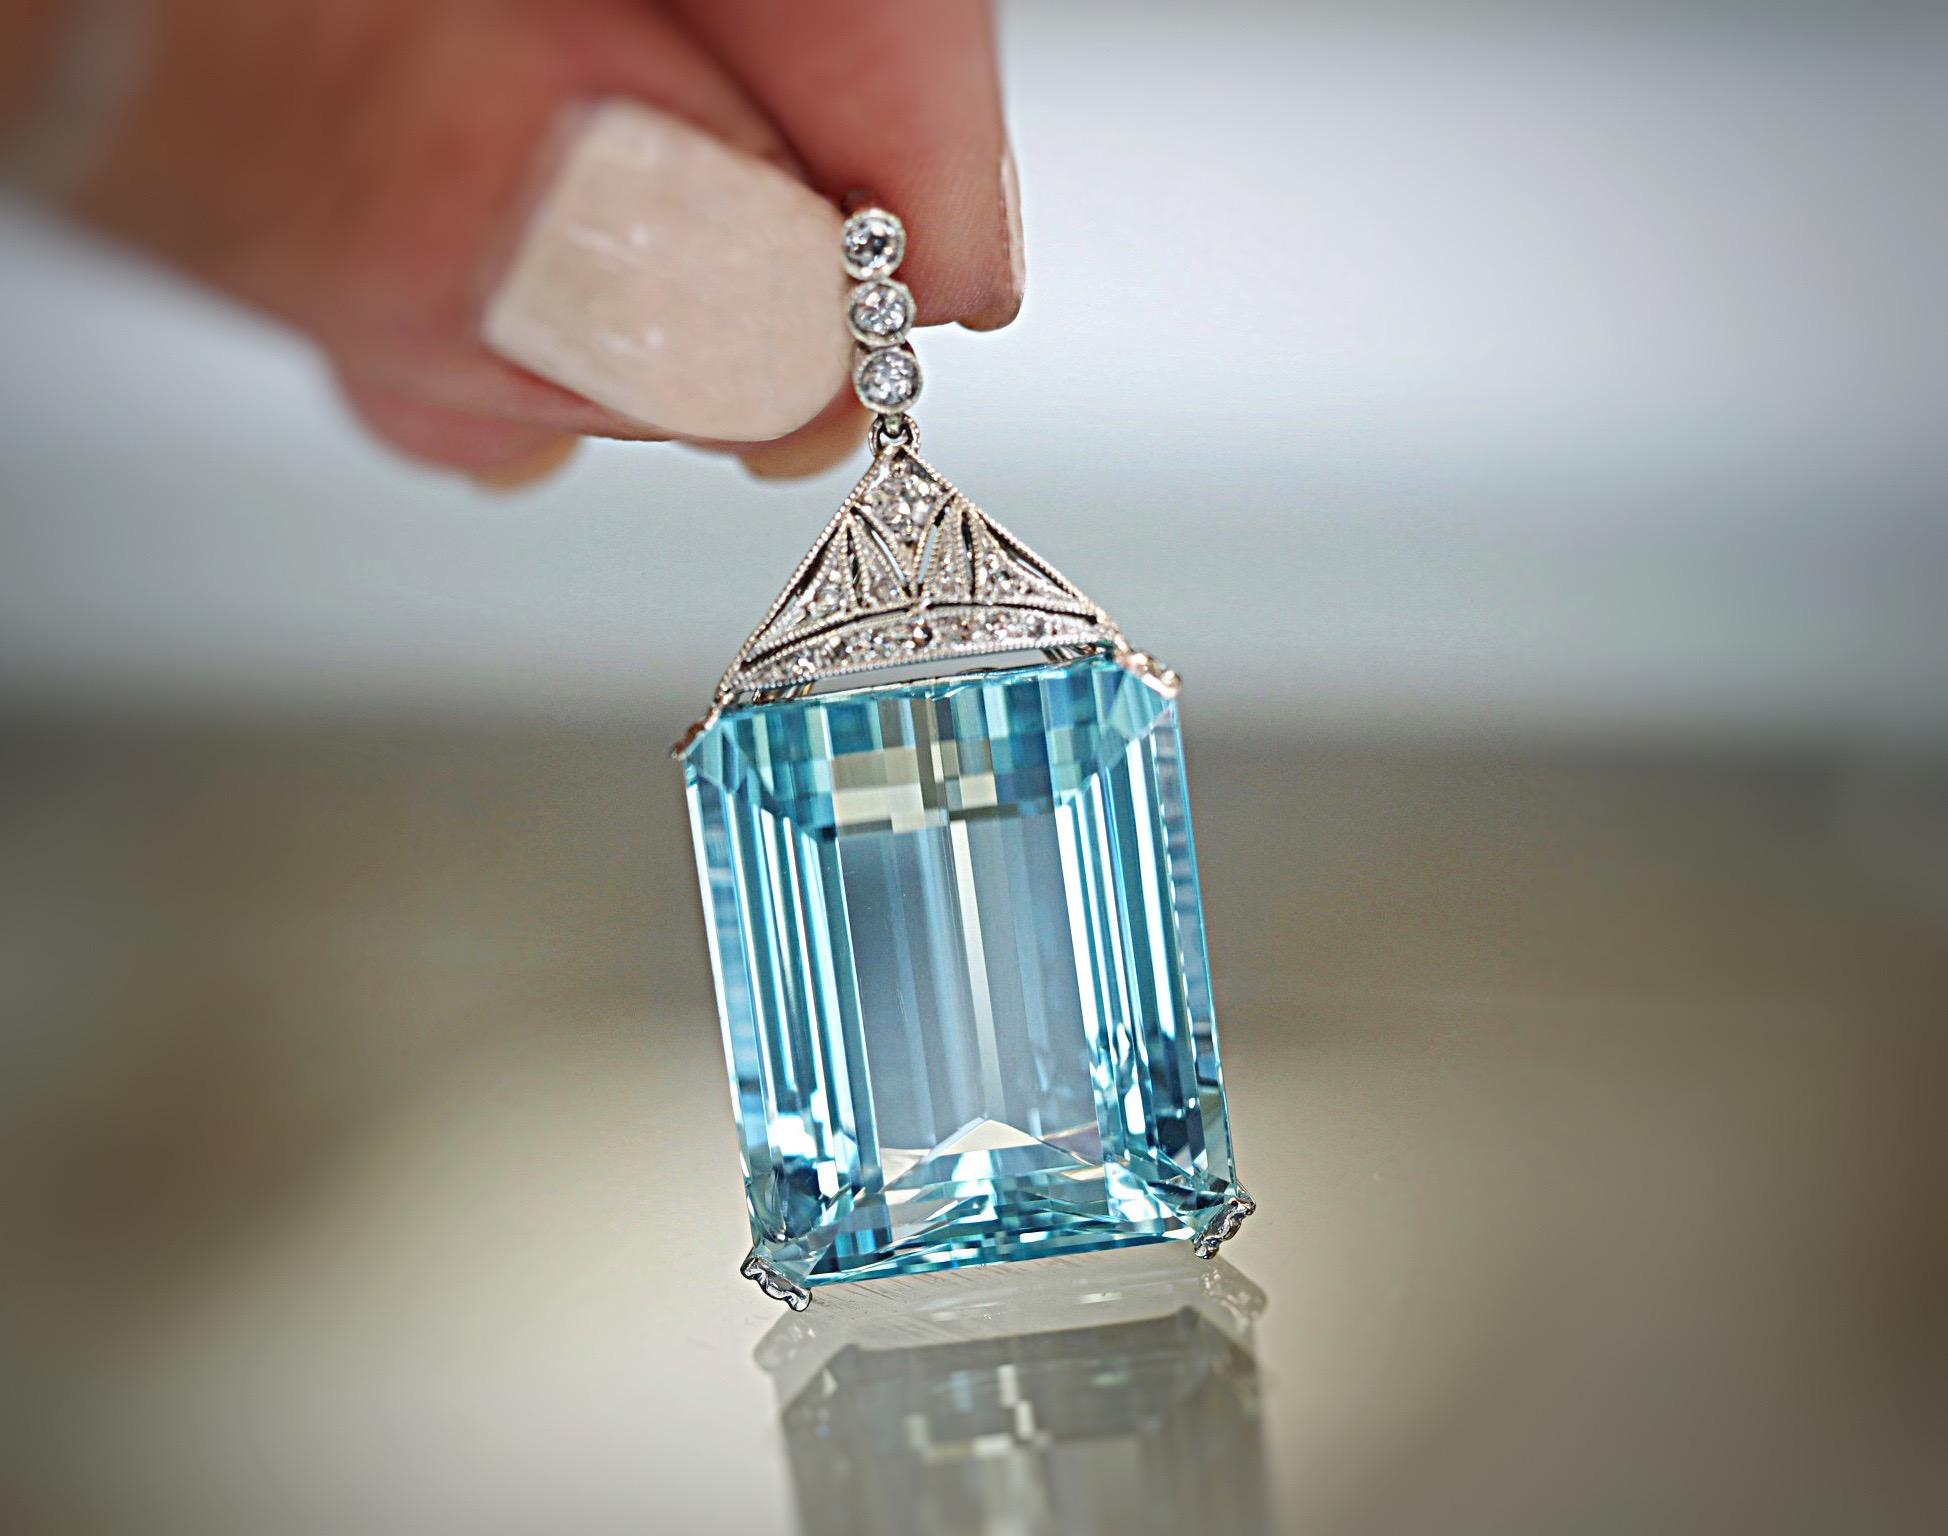 This incredible  aquamarine necklace is a true treasure . The emerald cut aquamarine weighs 47.83 carats and measures 24 MM x 19.55 MM x 2.70 MM. It has the desirable blue color that is mesmerizing to look at. The design the aquamarine is set in has